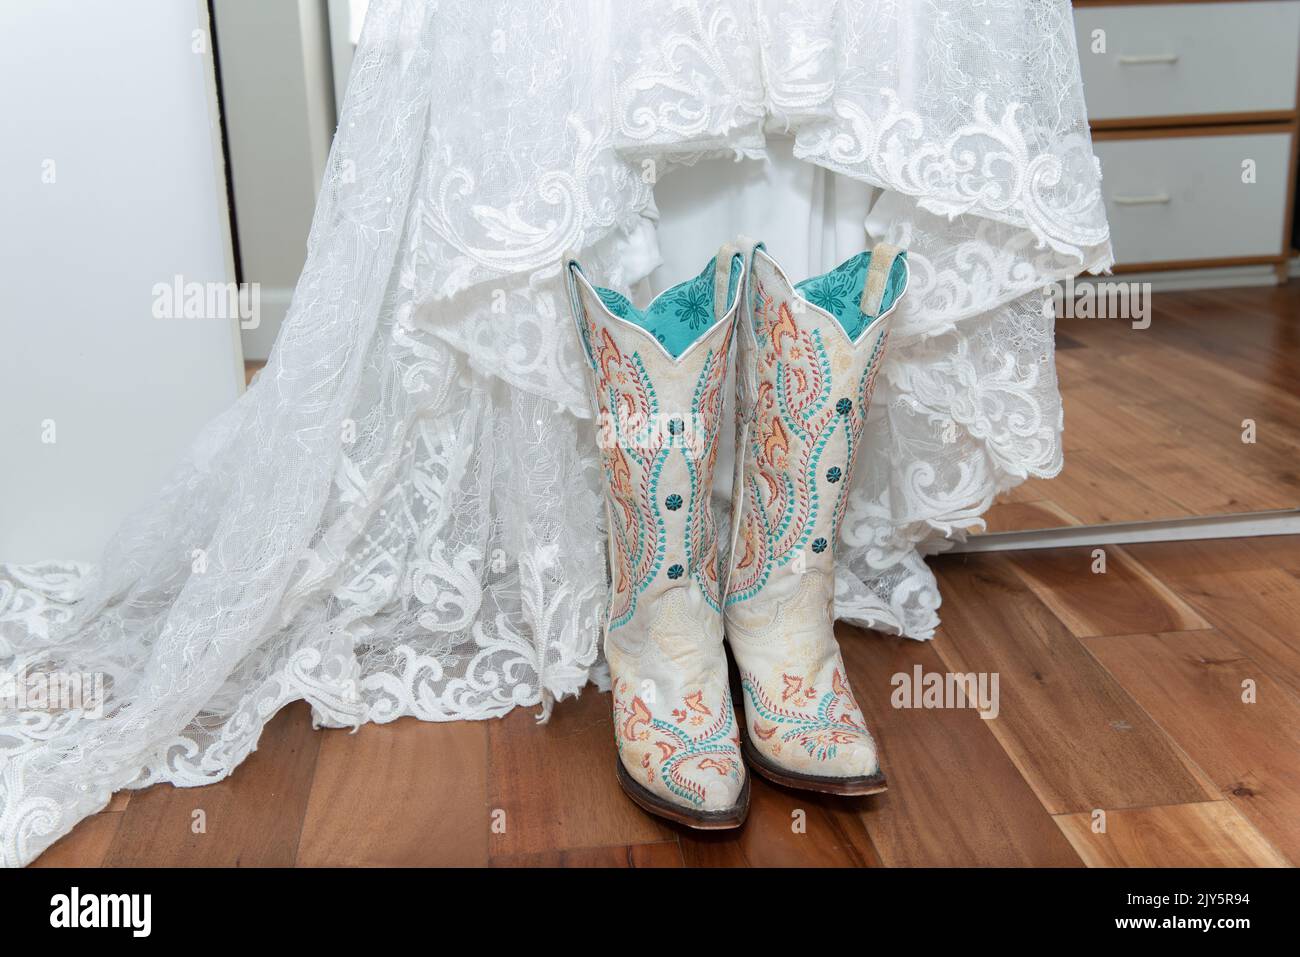 White lace dress of the bride is paired with white embroidered cowgirl boots for a western wedding ceremony. Stock Photo